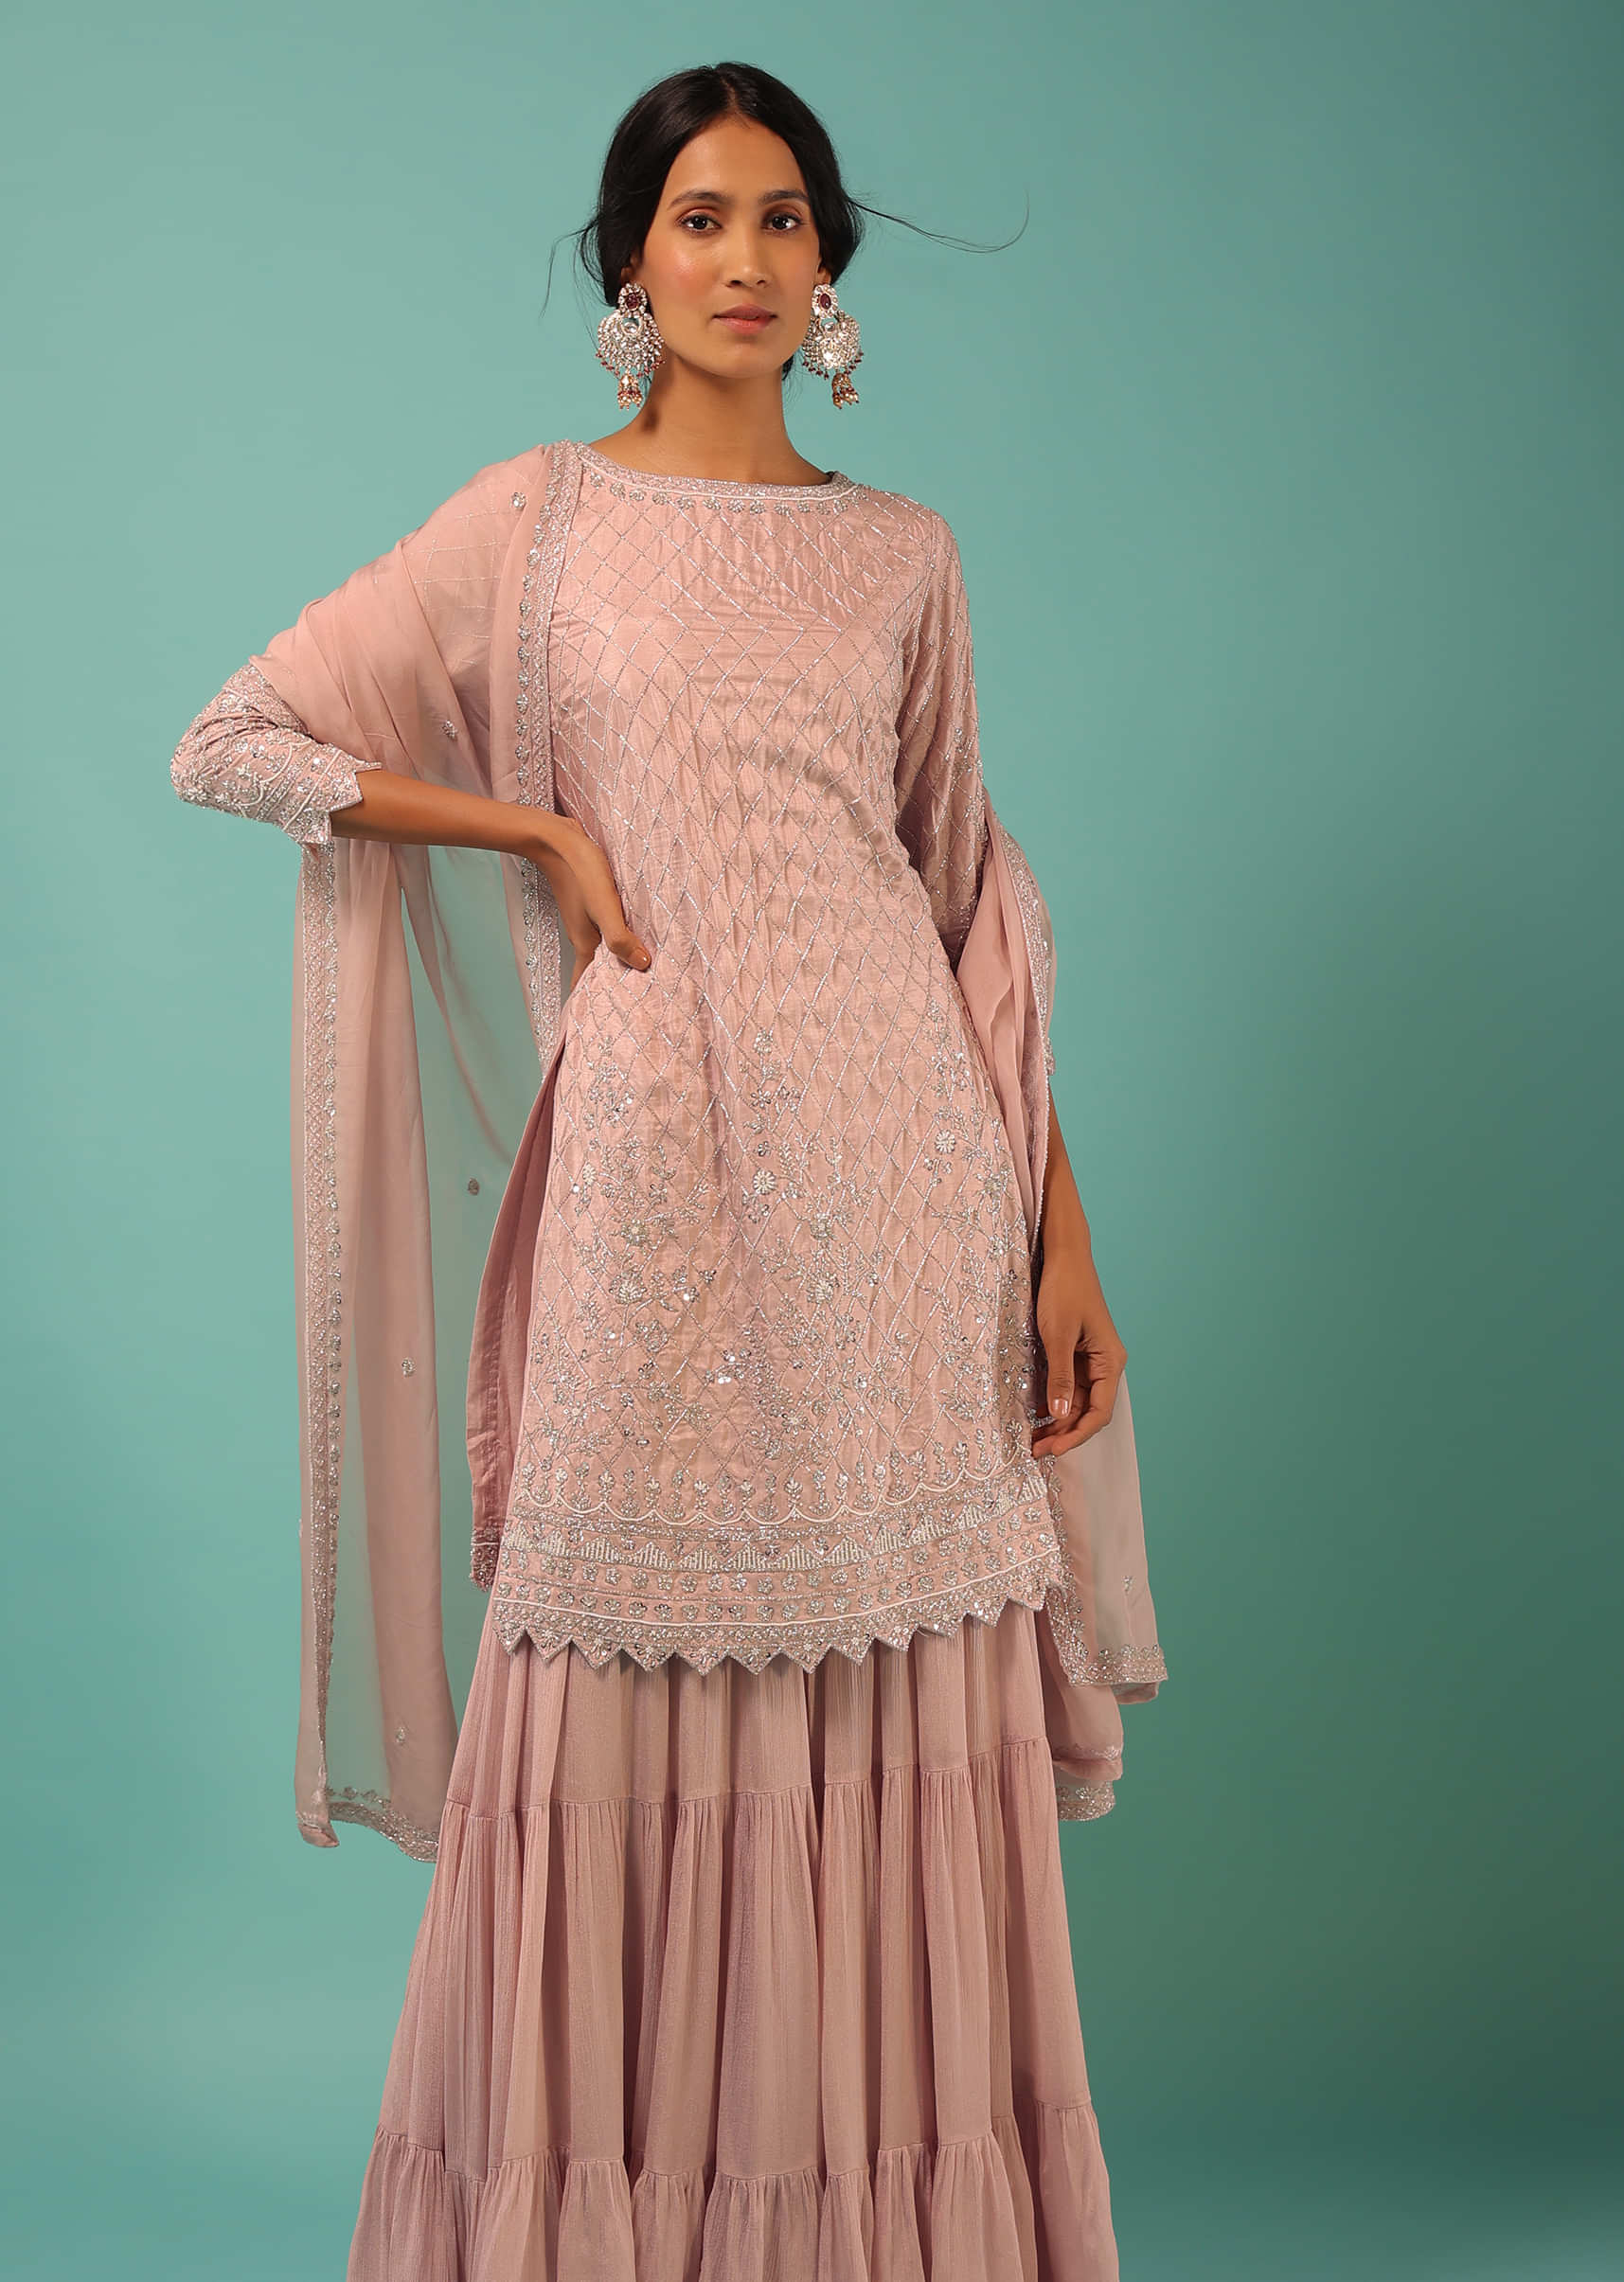 Salmon Pink Sharara Suit In Cotton Silk With Embroidered Floral Motifs